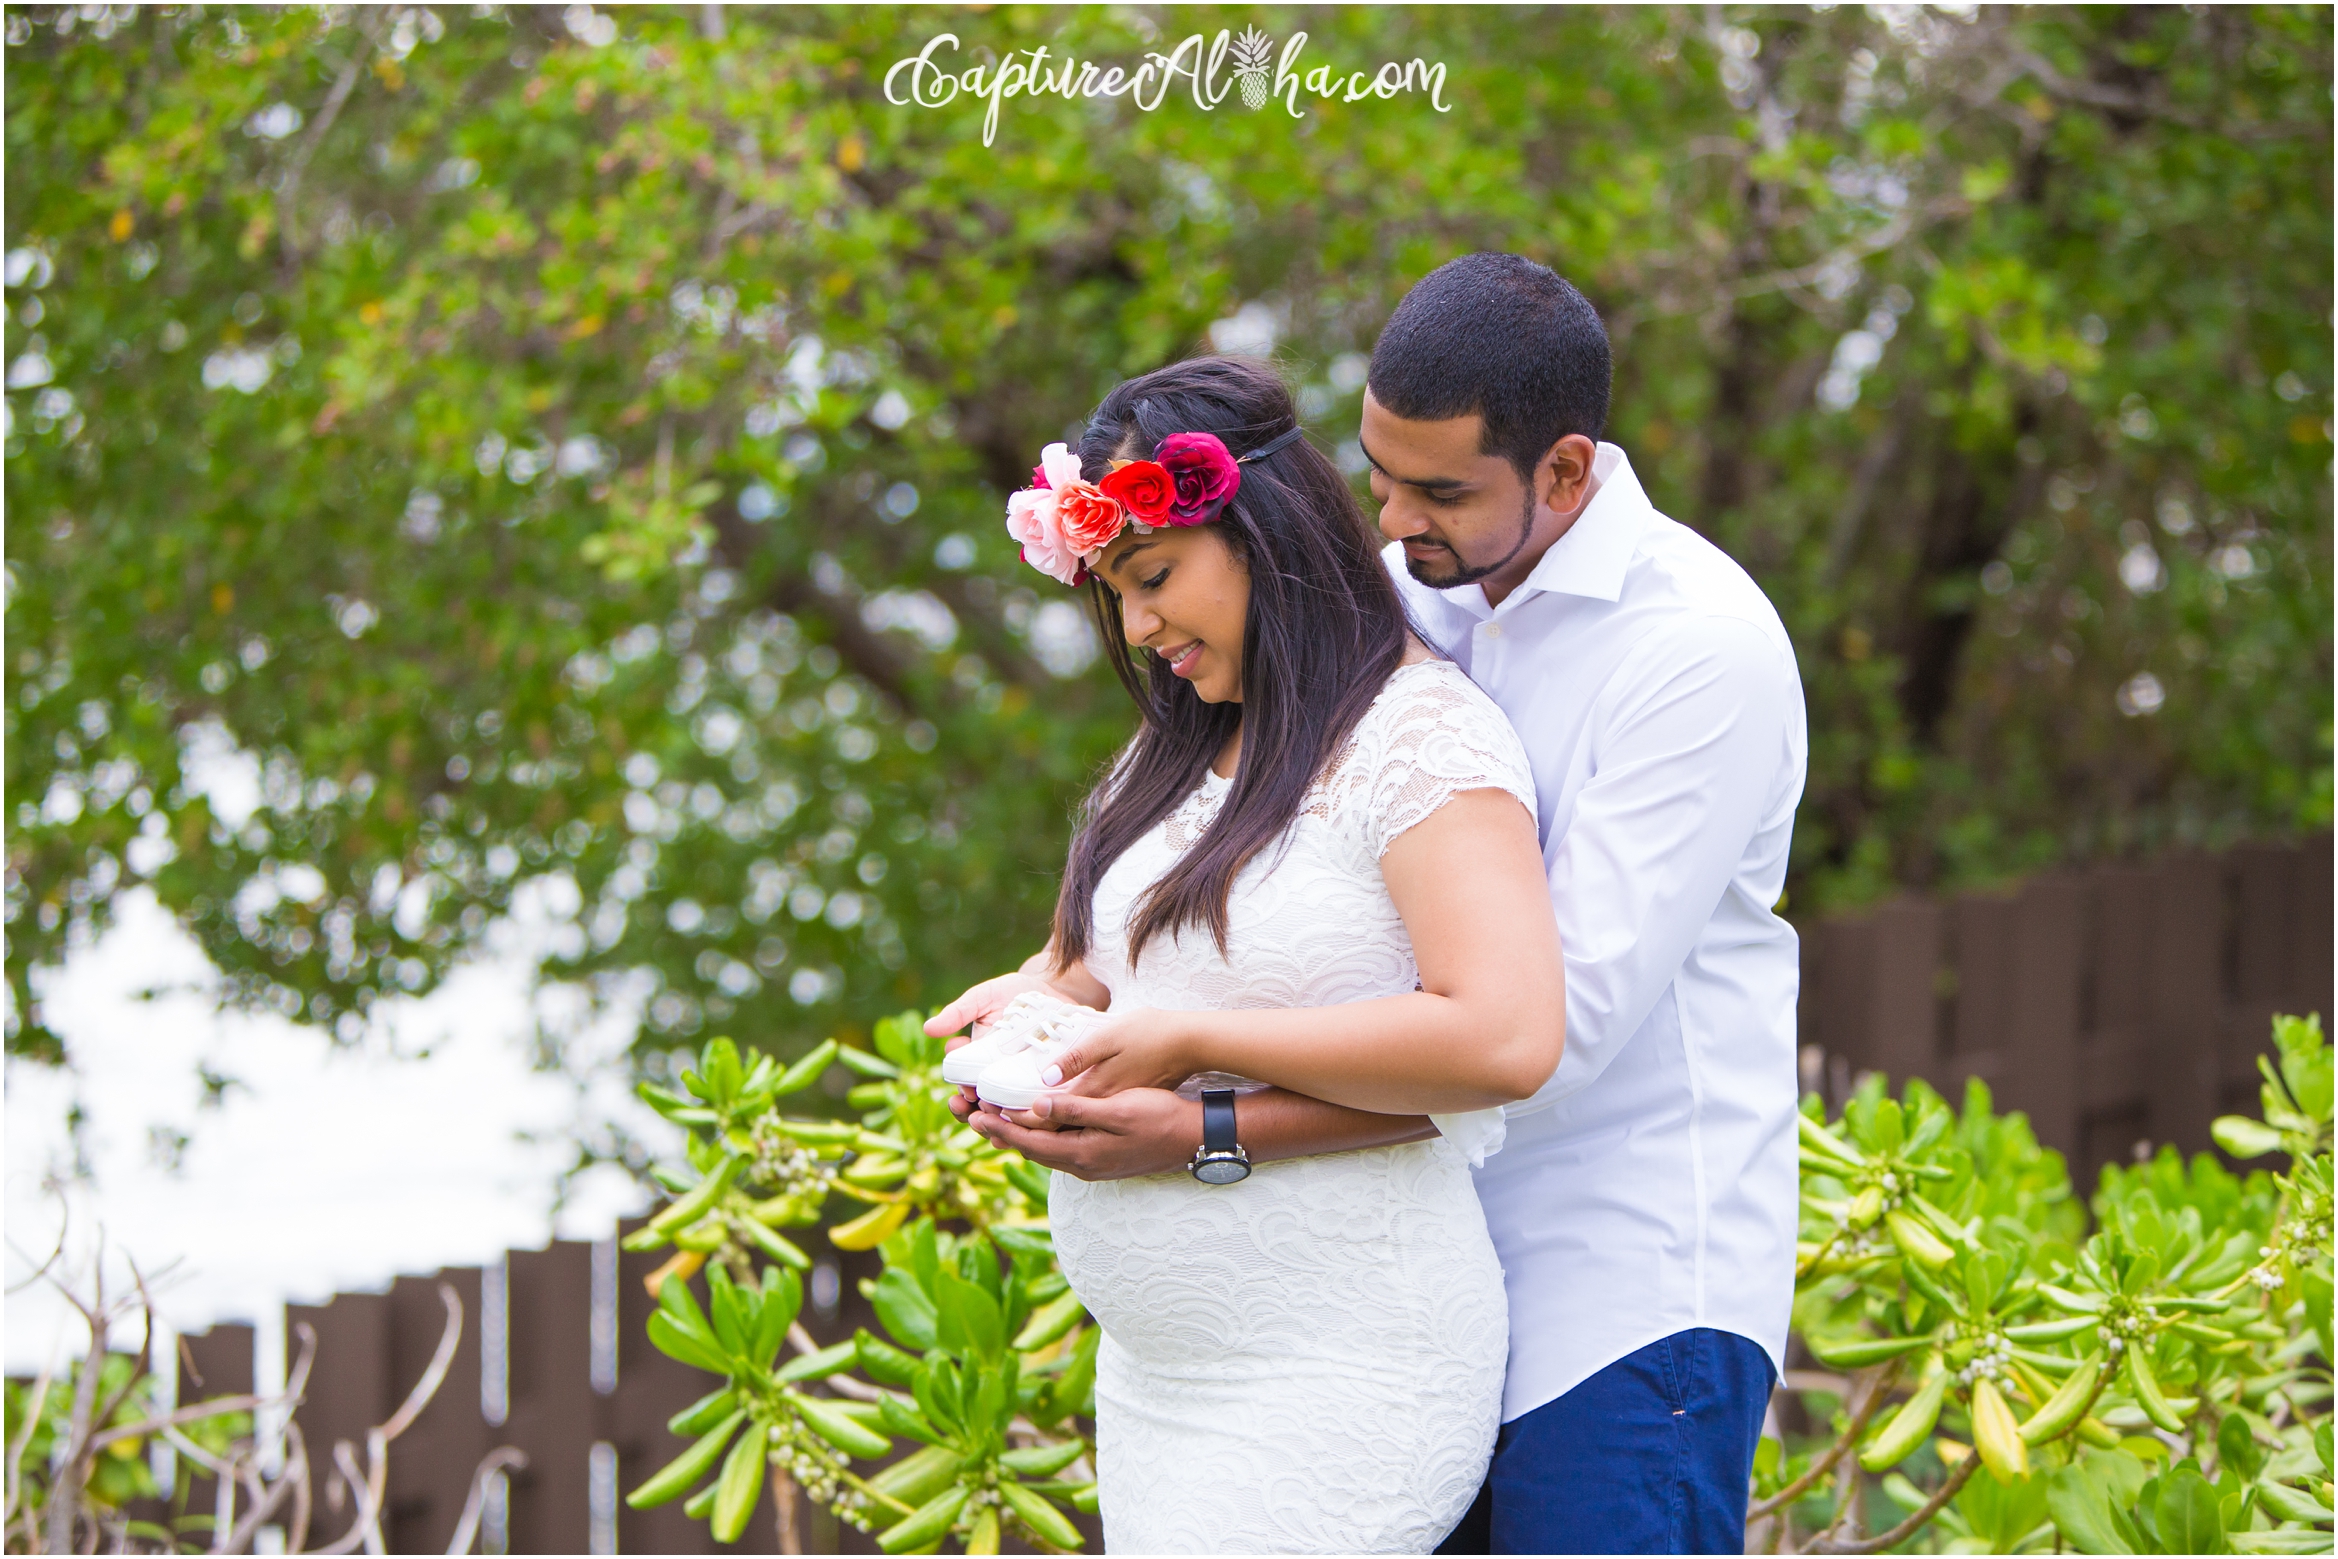 Maui Maternity Photography with couple wearing white and mom in a flower crown